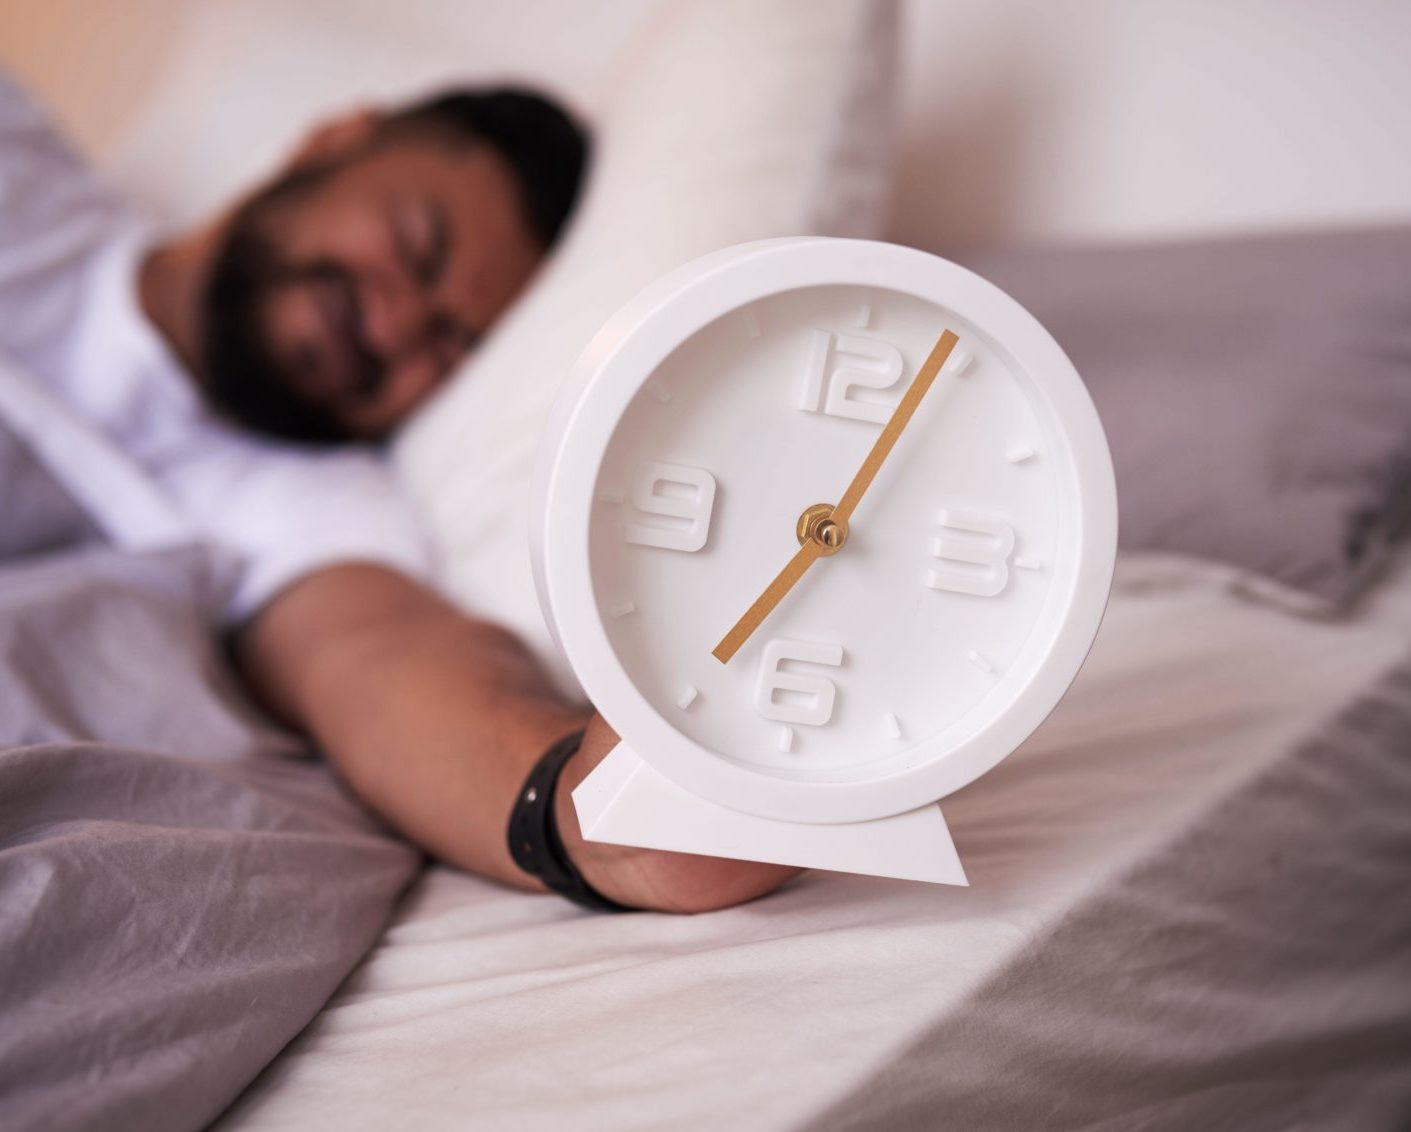 A 5am clock face in focus with an exhausted man sleeping in bed.